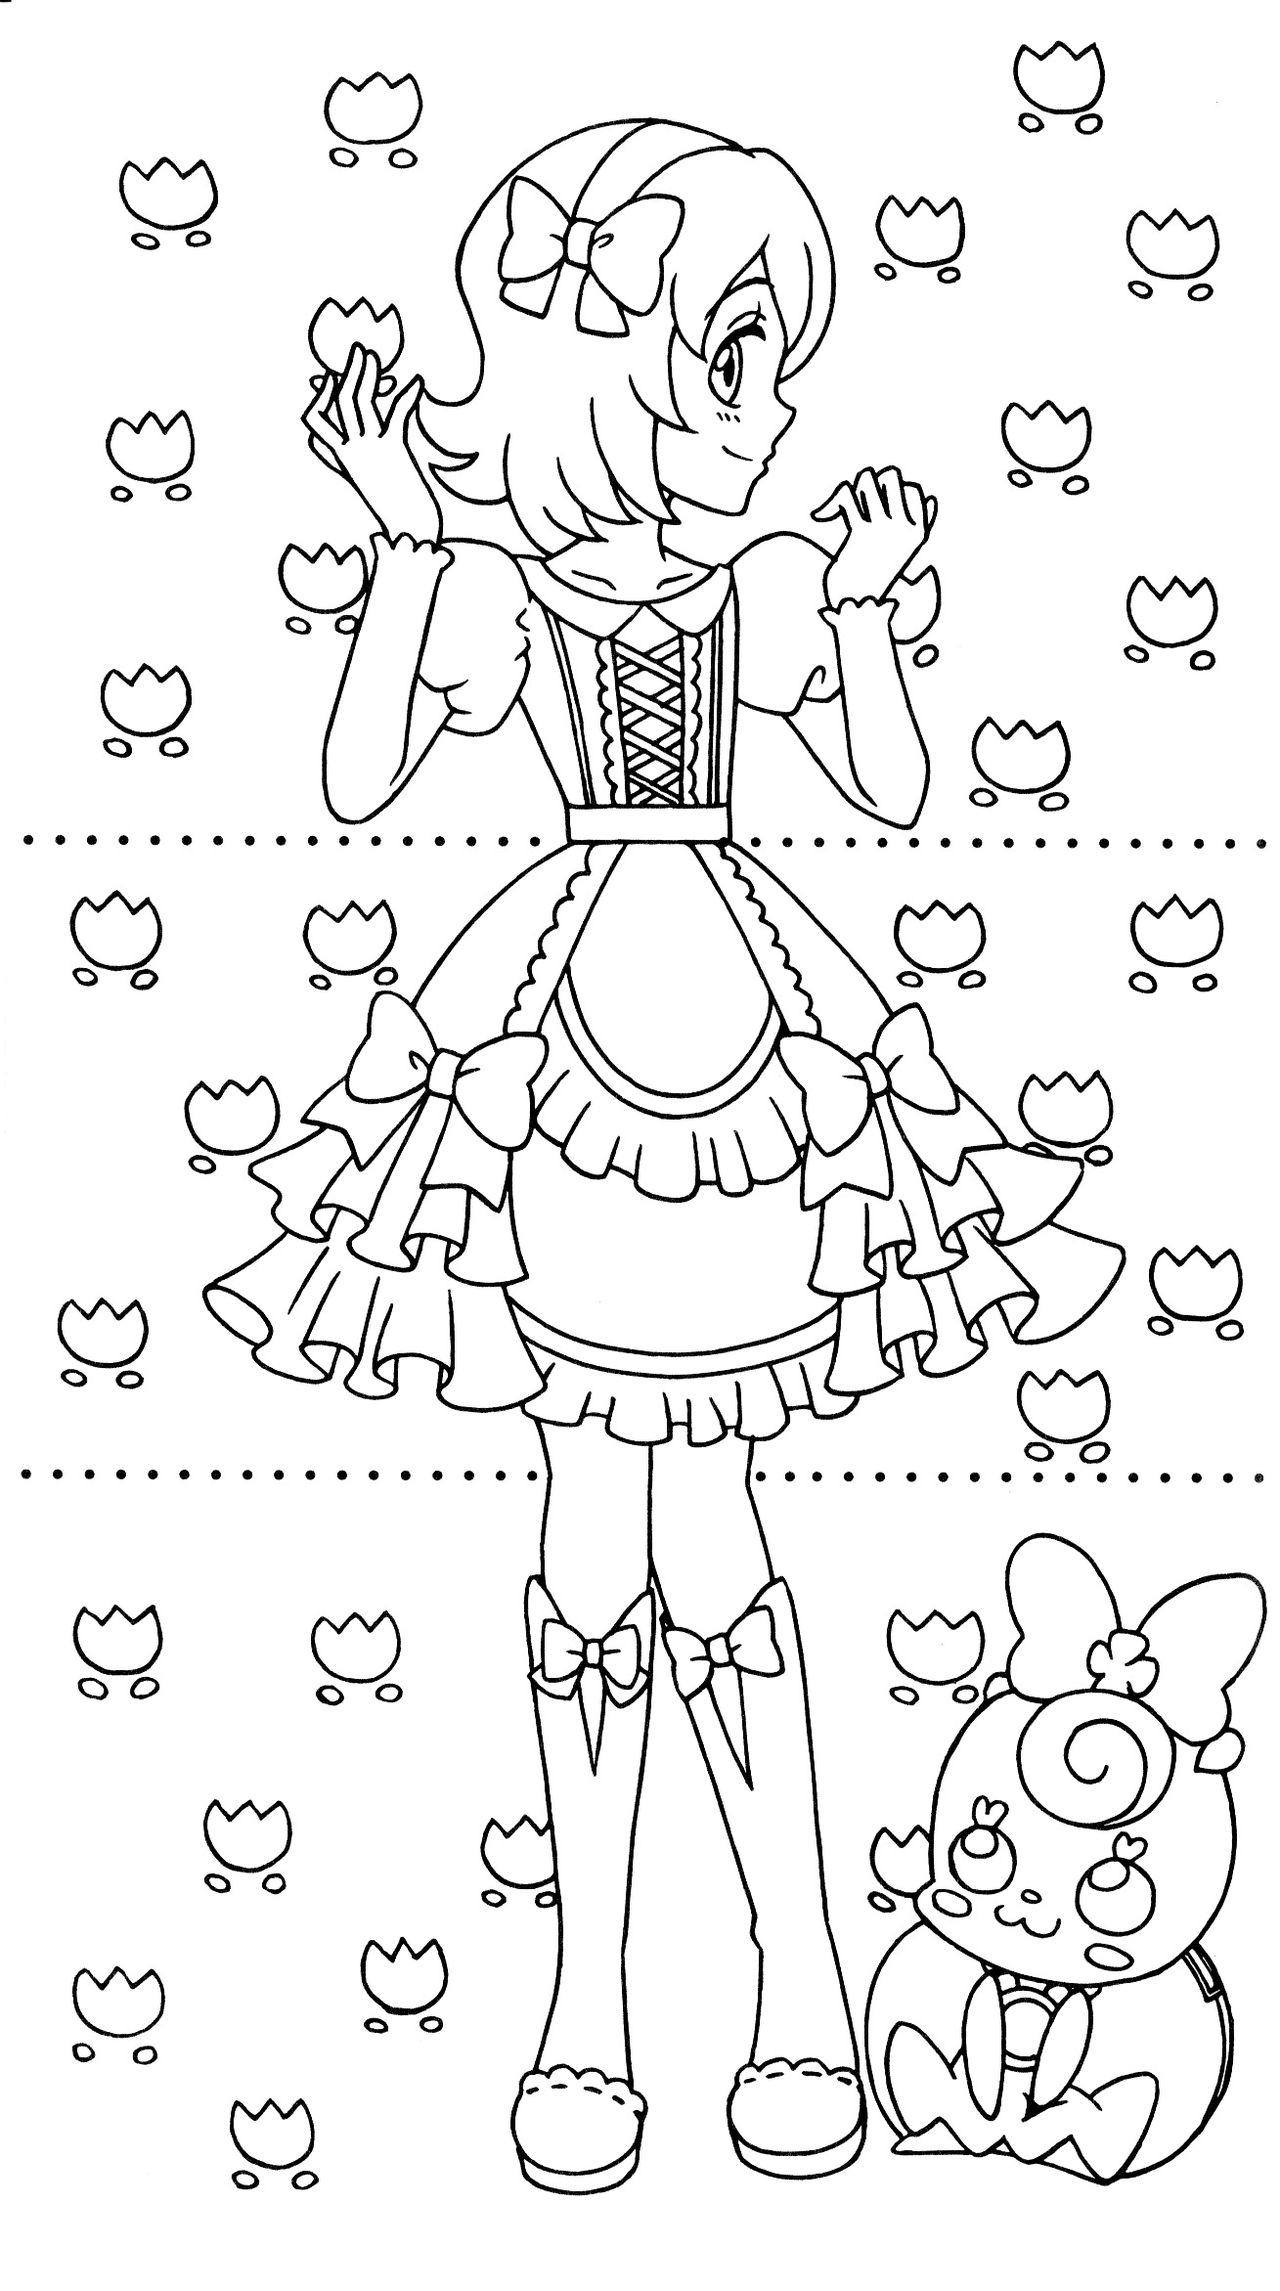 Happiness Charge Precure Dressup Coloring Book 26